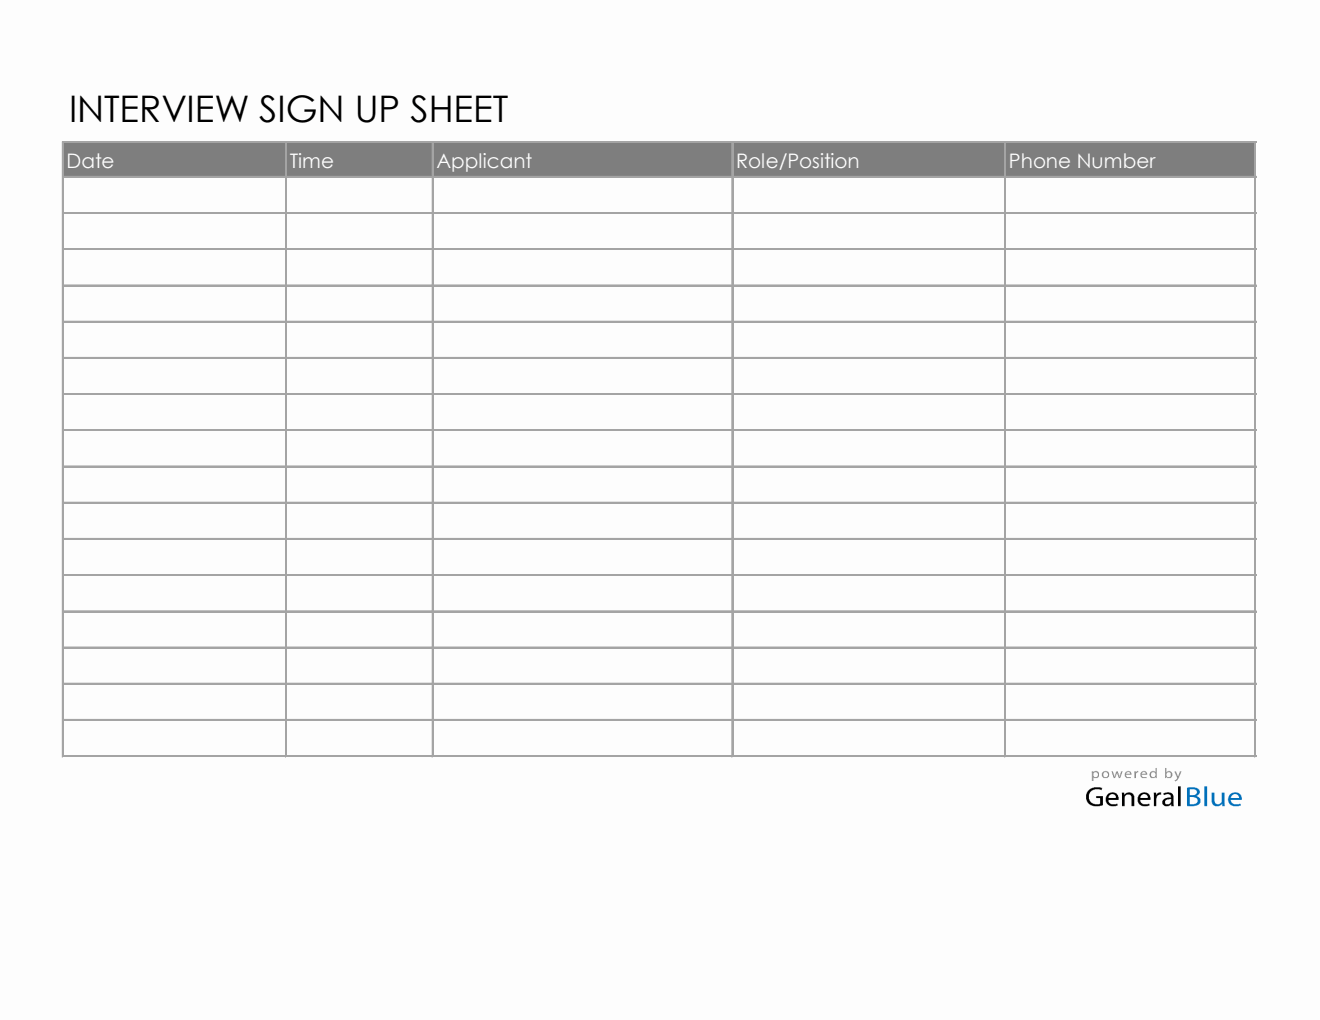 Interview Sign Up Sheet Template in Excel (Basic)